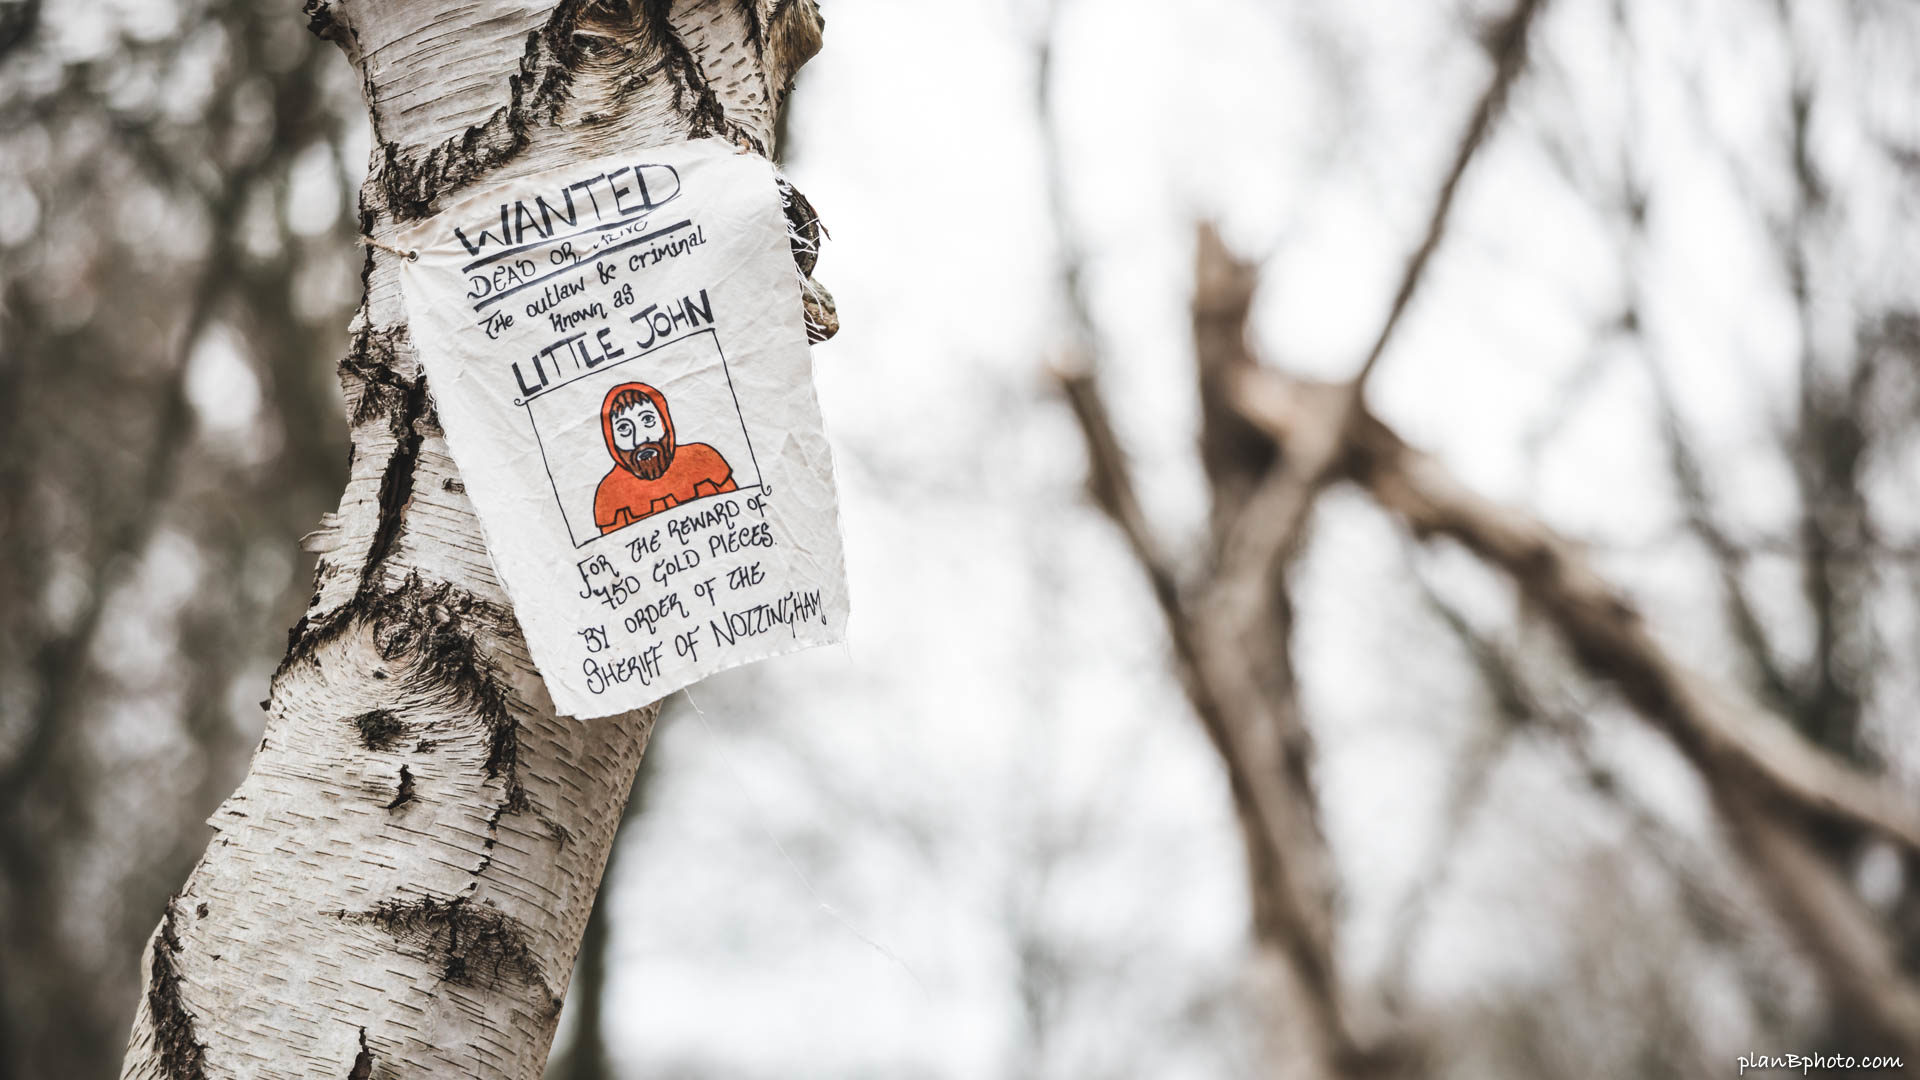 Sign in Sherwood Forest - Wanted: Little John